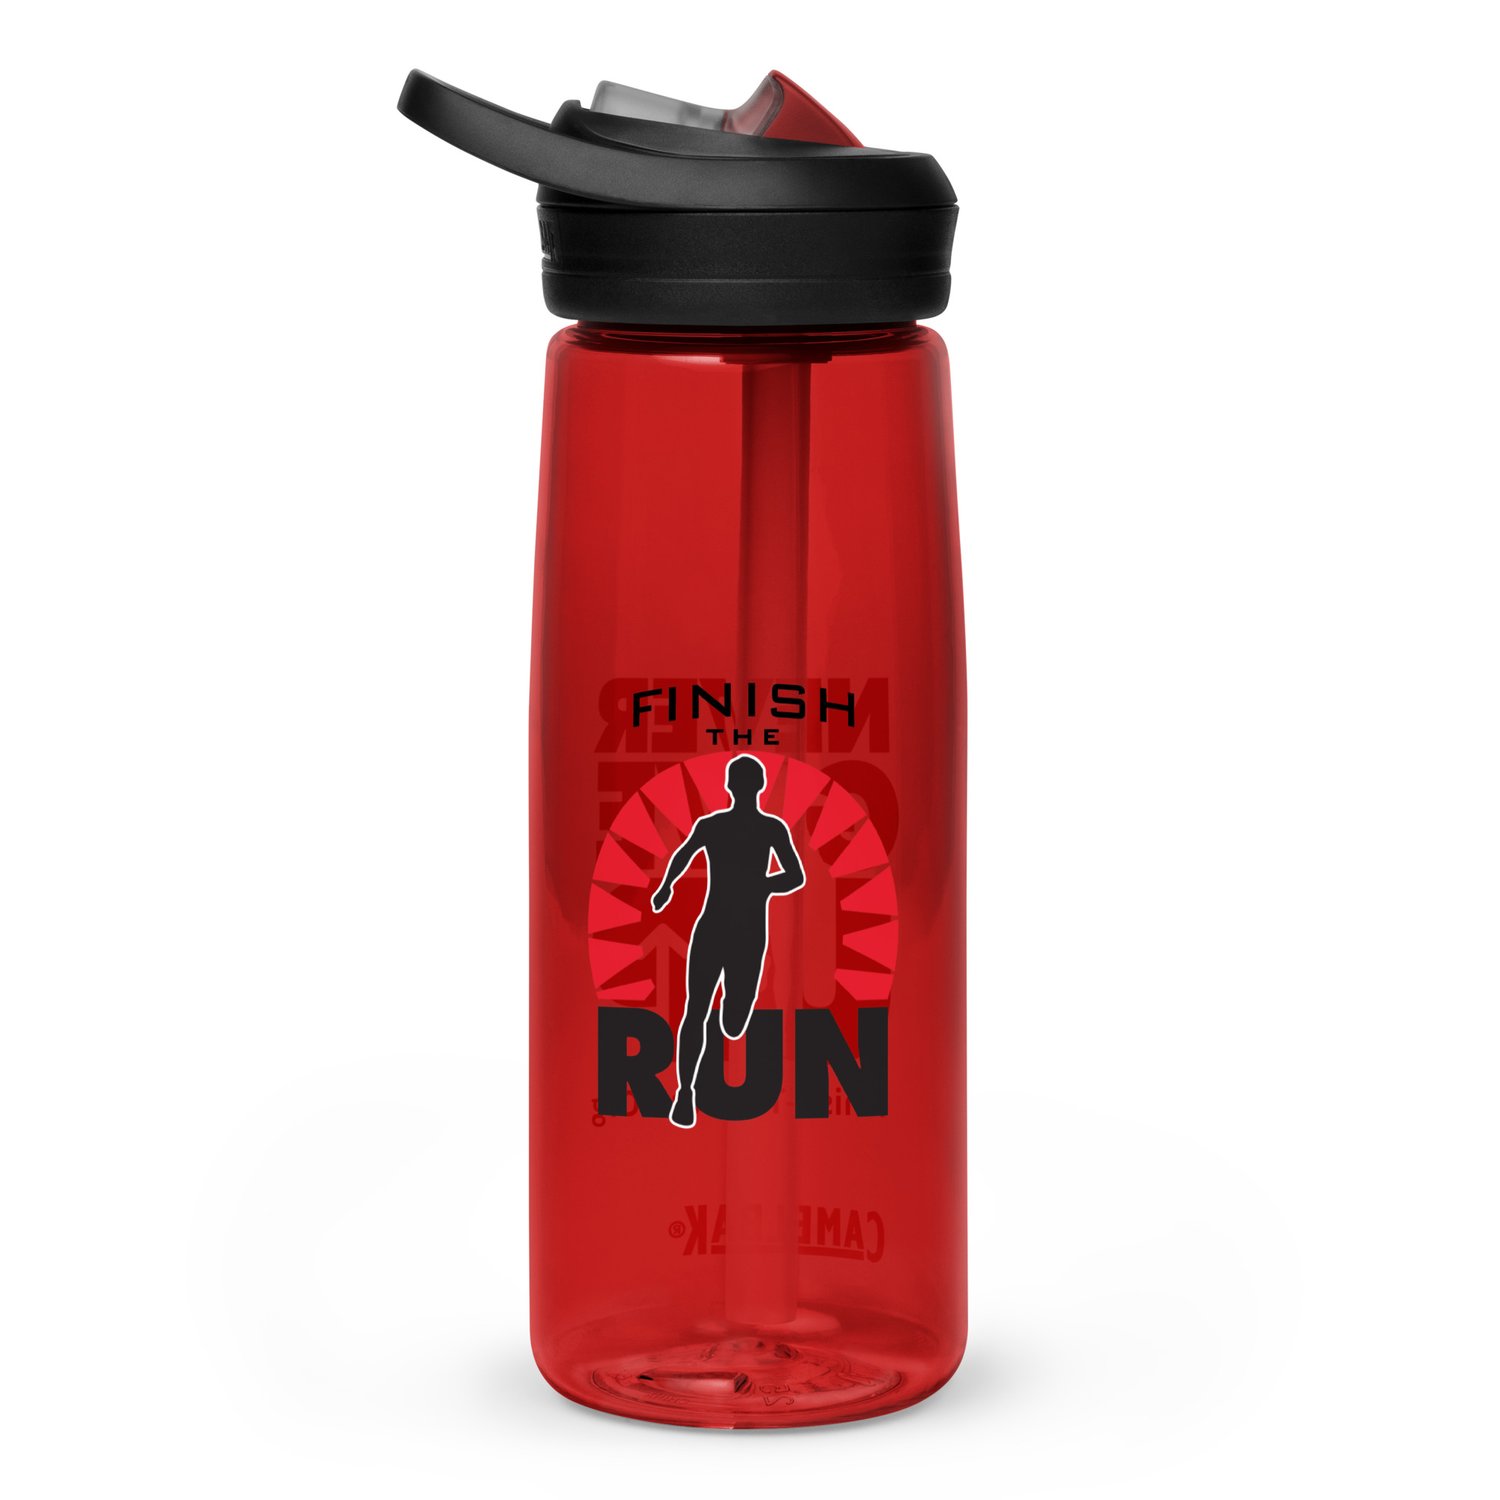 Finish The Ride, Never Give Up, Sports Water Bottle — Streets Are For  Everyone